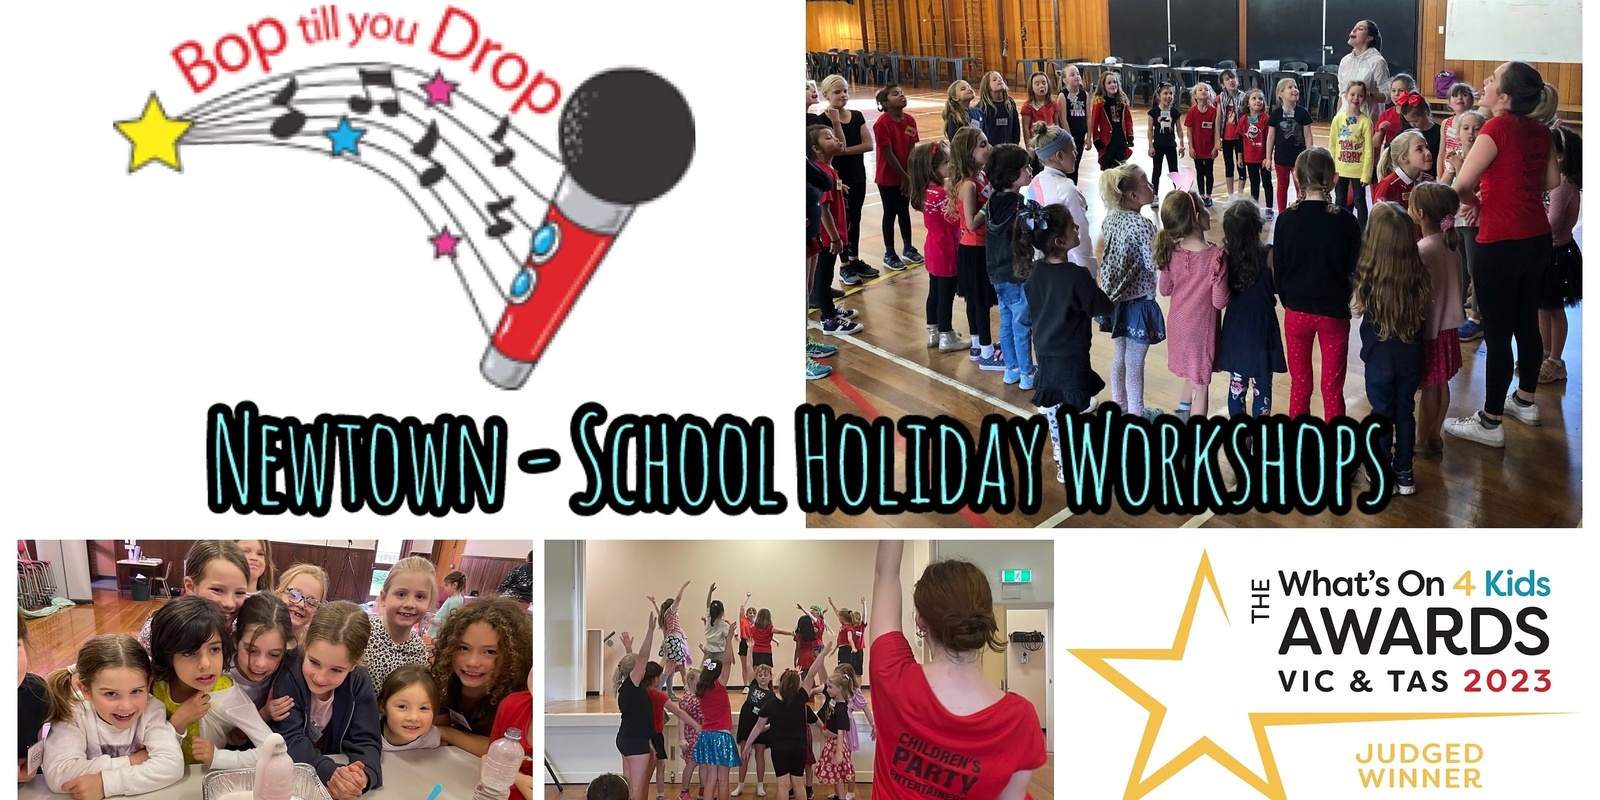 Banner image for Bop till you Drop NEWTOWN School Holiday Performing Arts Workshop